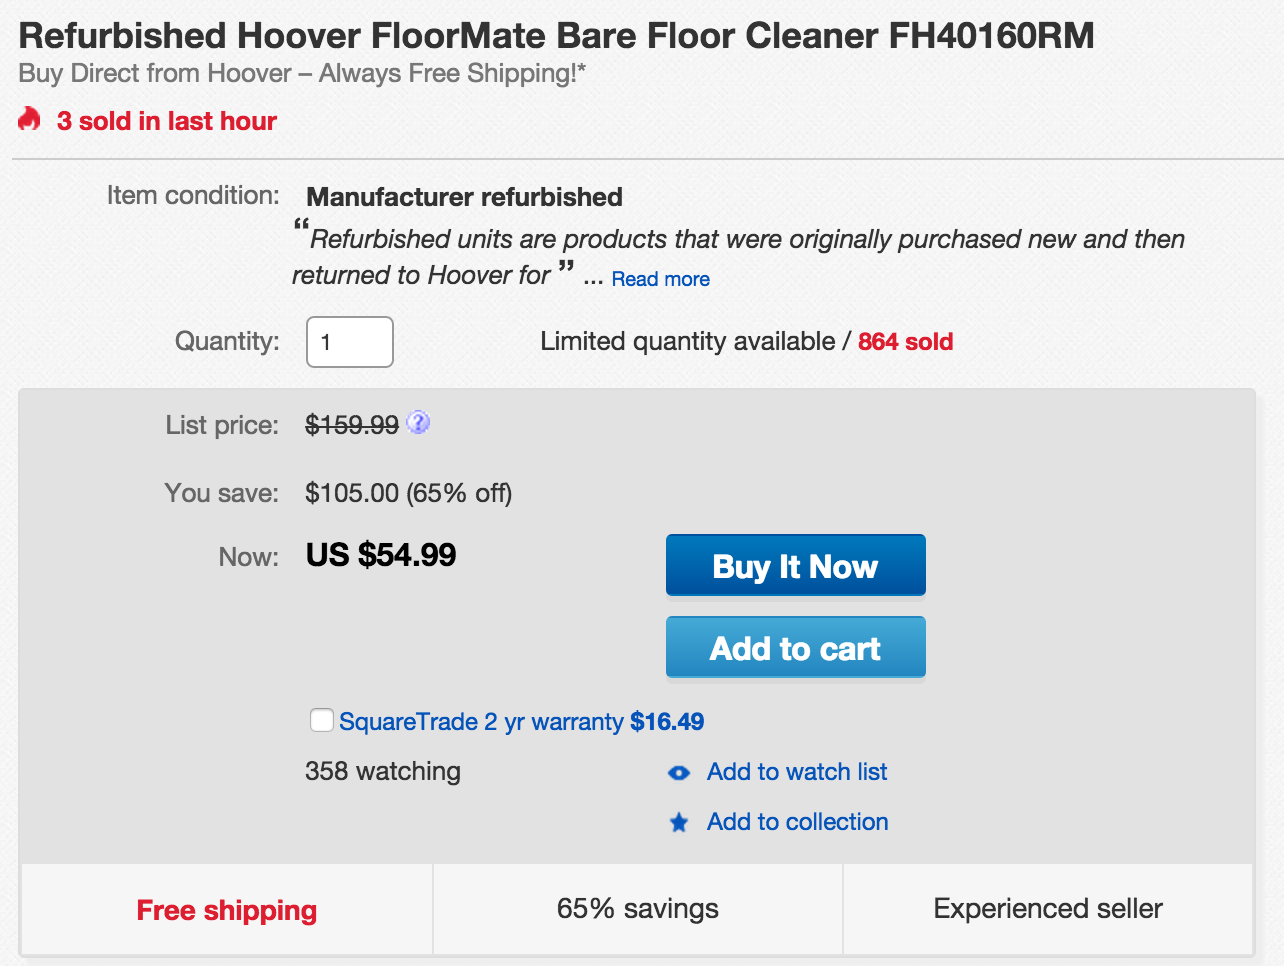 https://9to5toys.com/wp-content/uploads/sites/5/2015/07/hoover-floormate-bare-floor-cleaner-fh40160rm-sale-02.png